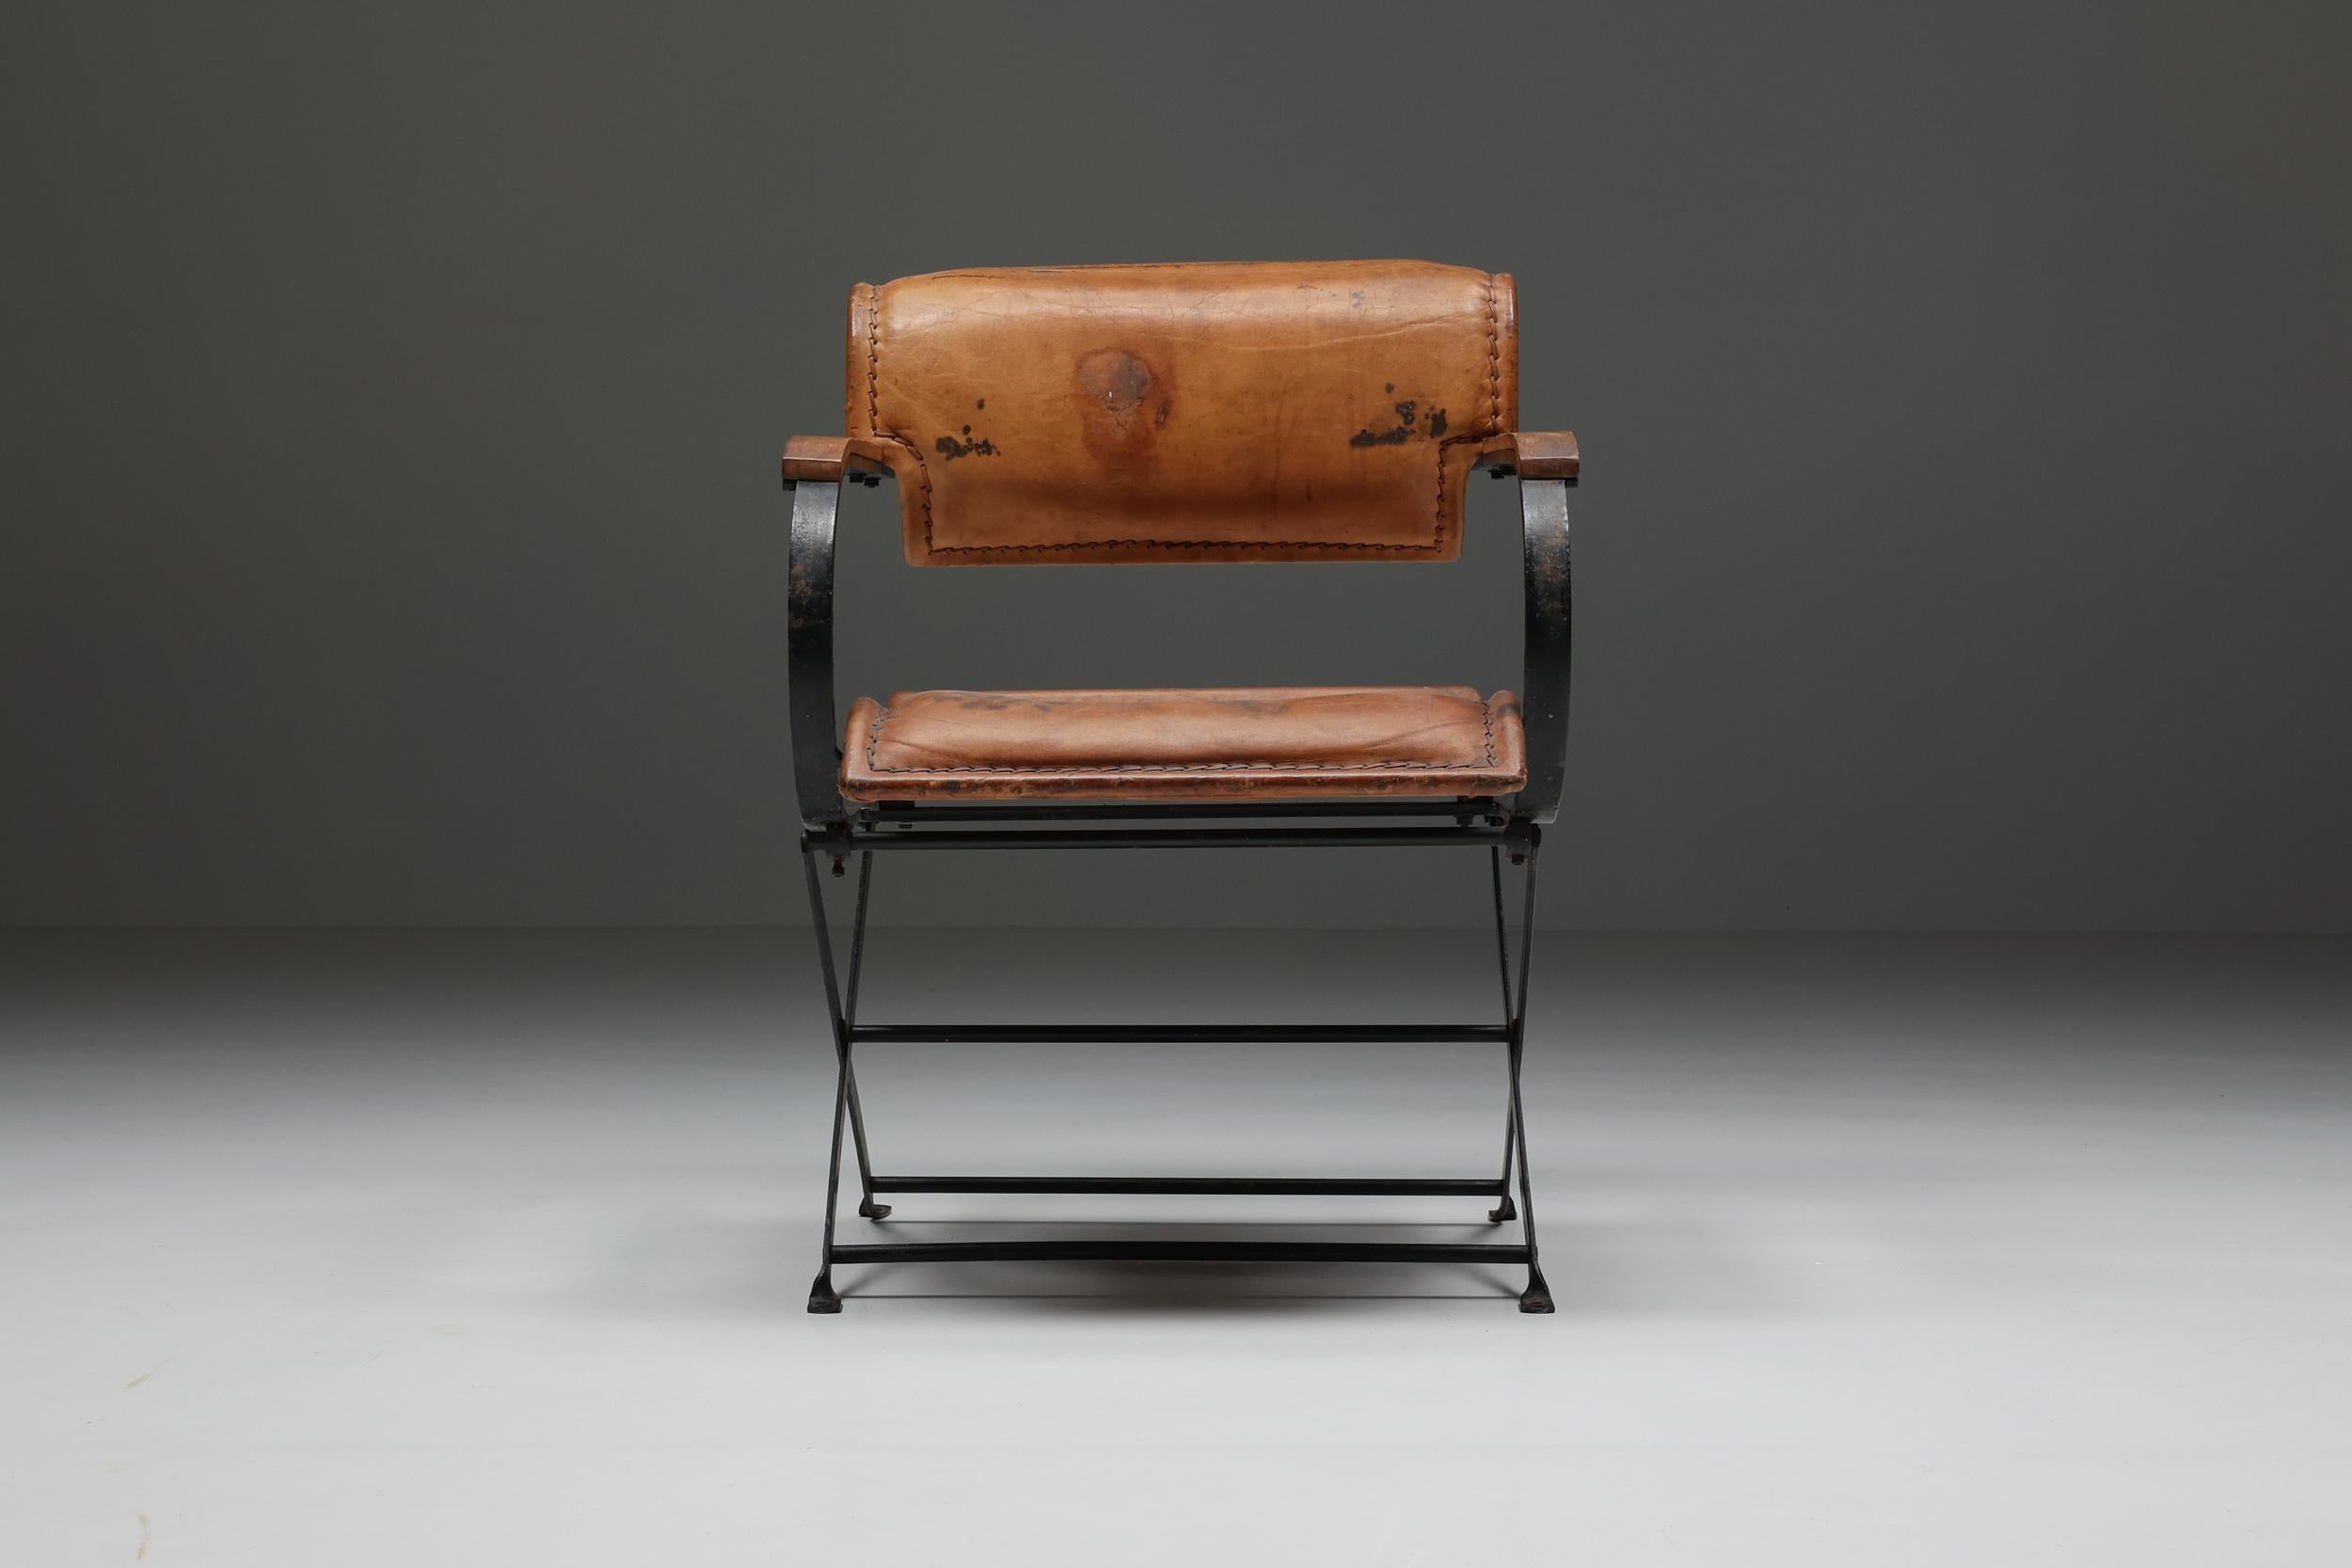 Industrial; armchair; Post-modern; leather; metal; Patina; 1990's

Postmodern armchair with remarkable patina. The black painted metal structure has a very industrial feeling to it. The leather seating and arm and backrest are a very comfortable